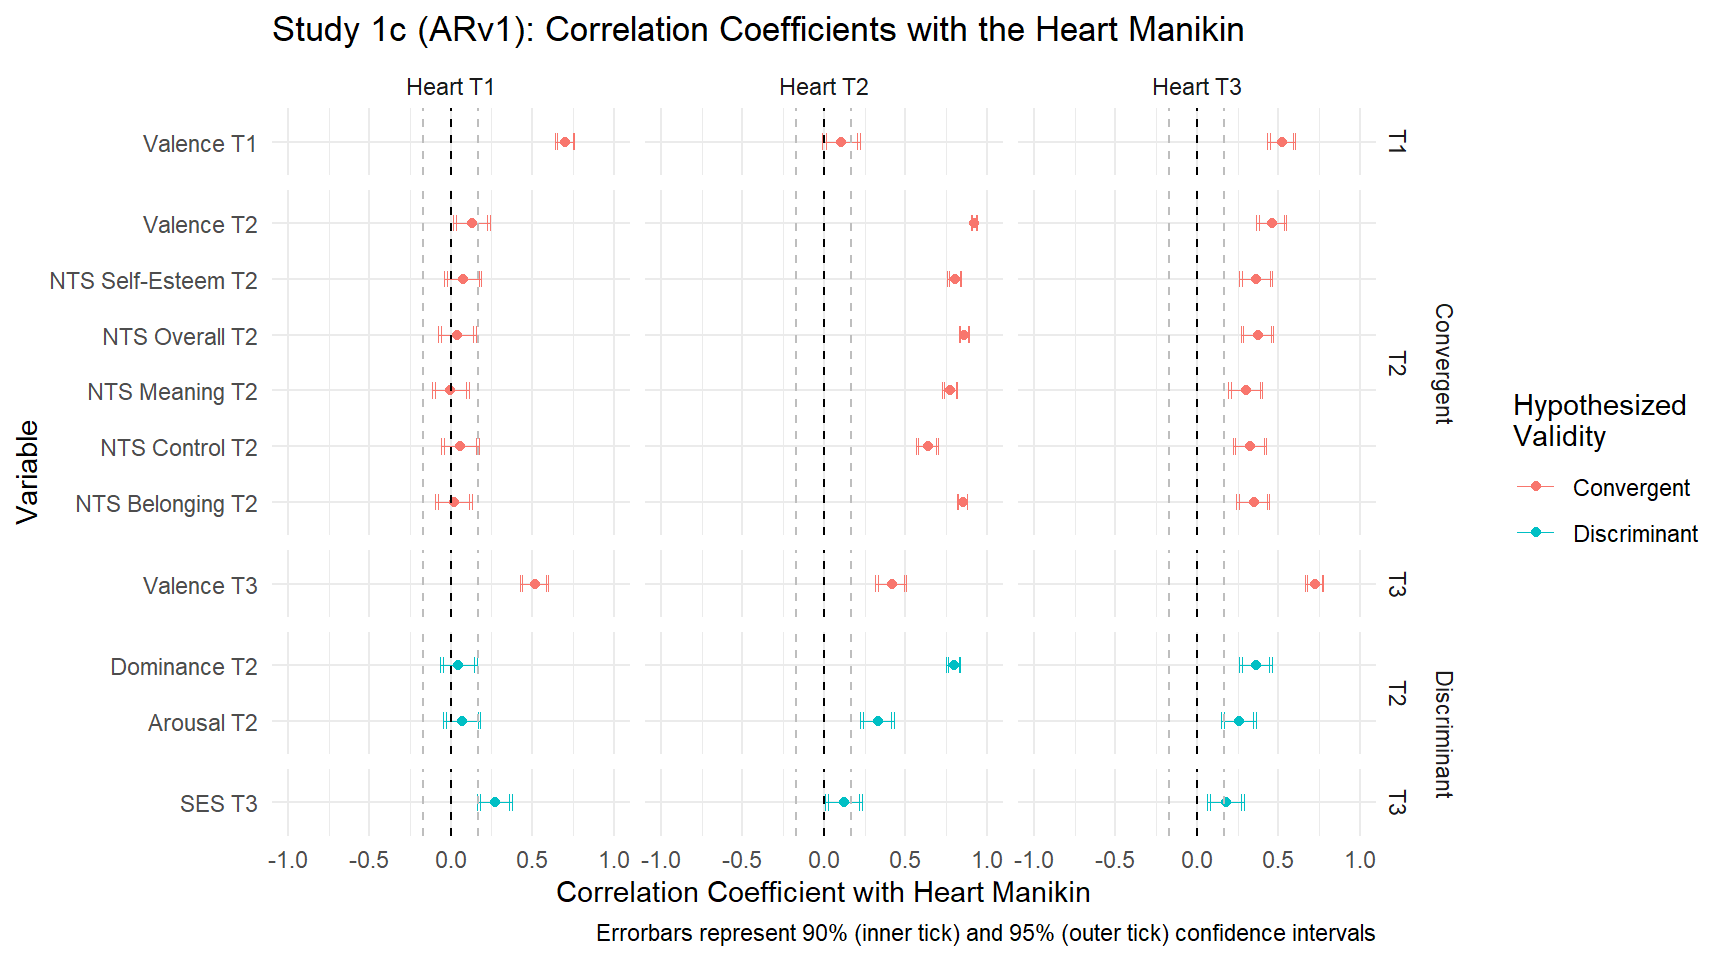 Study 1c - Forestplot of Correlation Coefficients between the Measured Variabels with the Heart Manikin